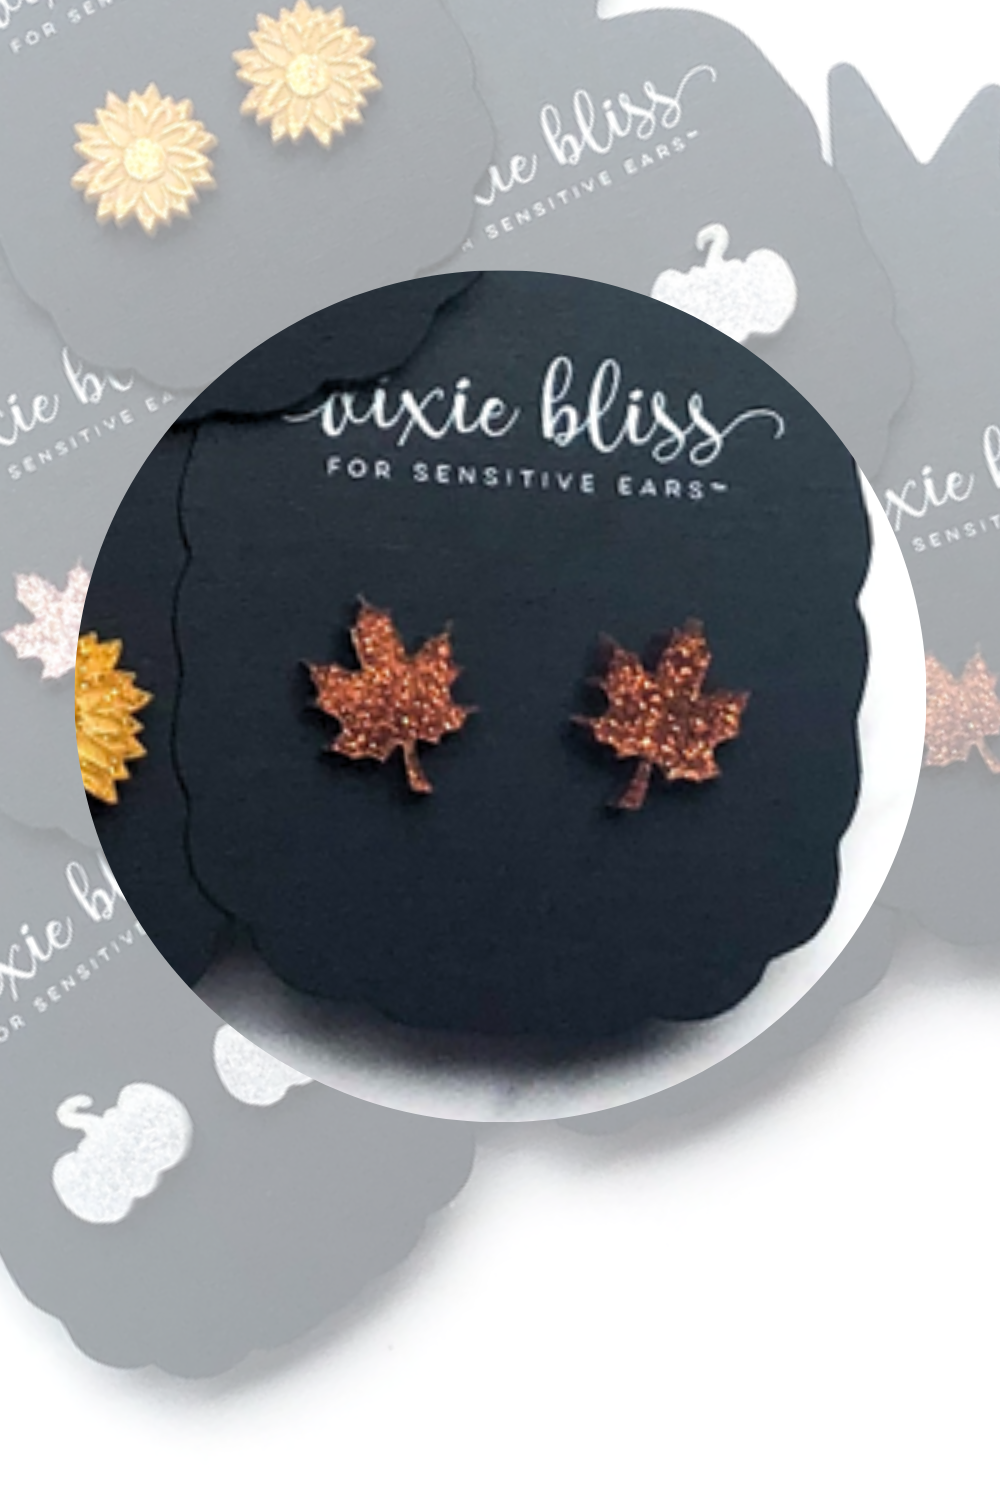 Hypoallergenic Earrings for Sensitive Ears. Made in the USA by a woman-owned company Dixie Bliss Earrings Brand. Safe Earrings. Autumn Things. Pumpkin, Maple Leaf, Sunflower Earrings Fall Jewelry